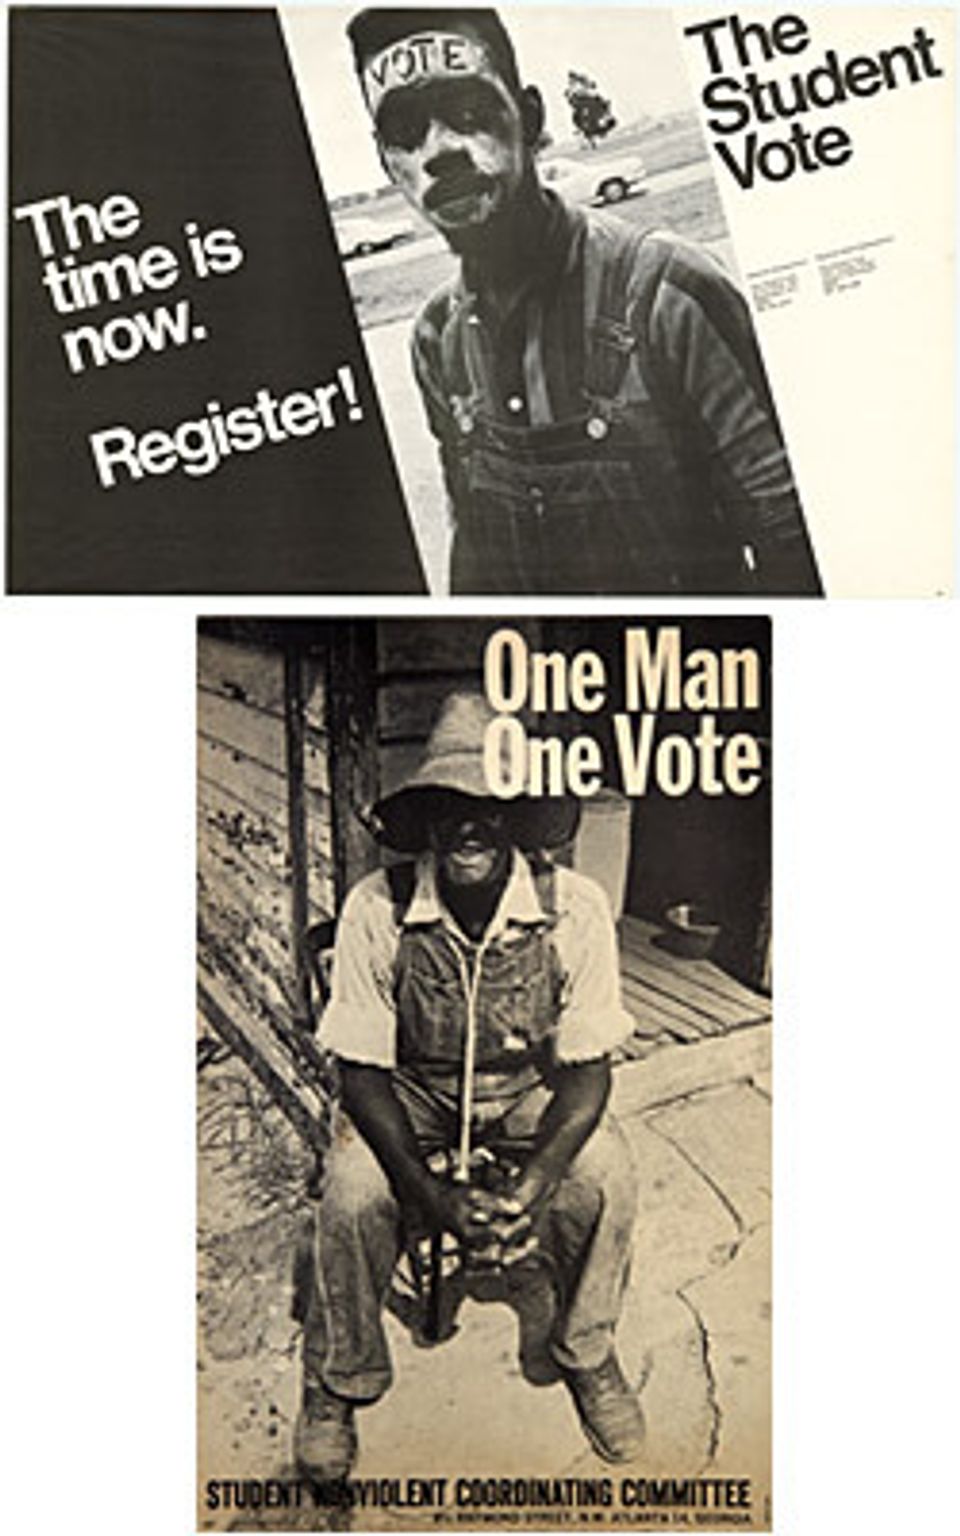 Two posters encouraging people to vote